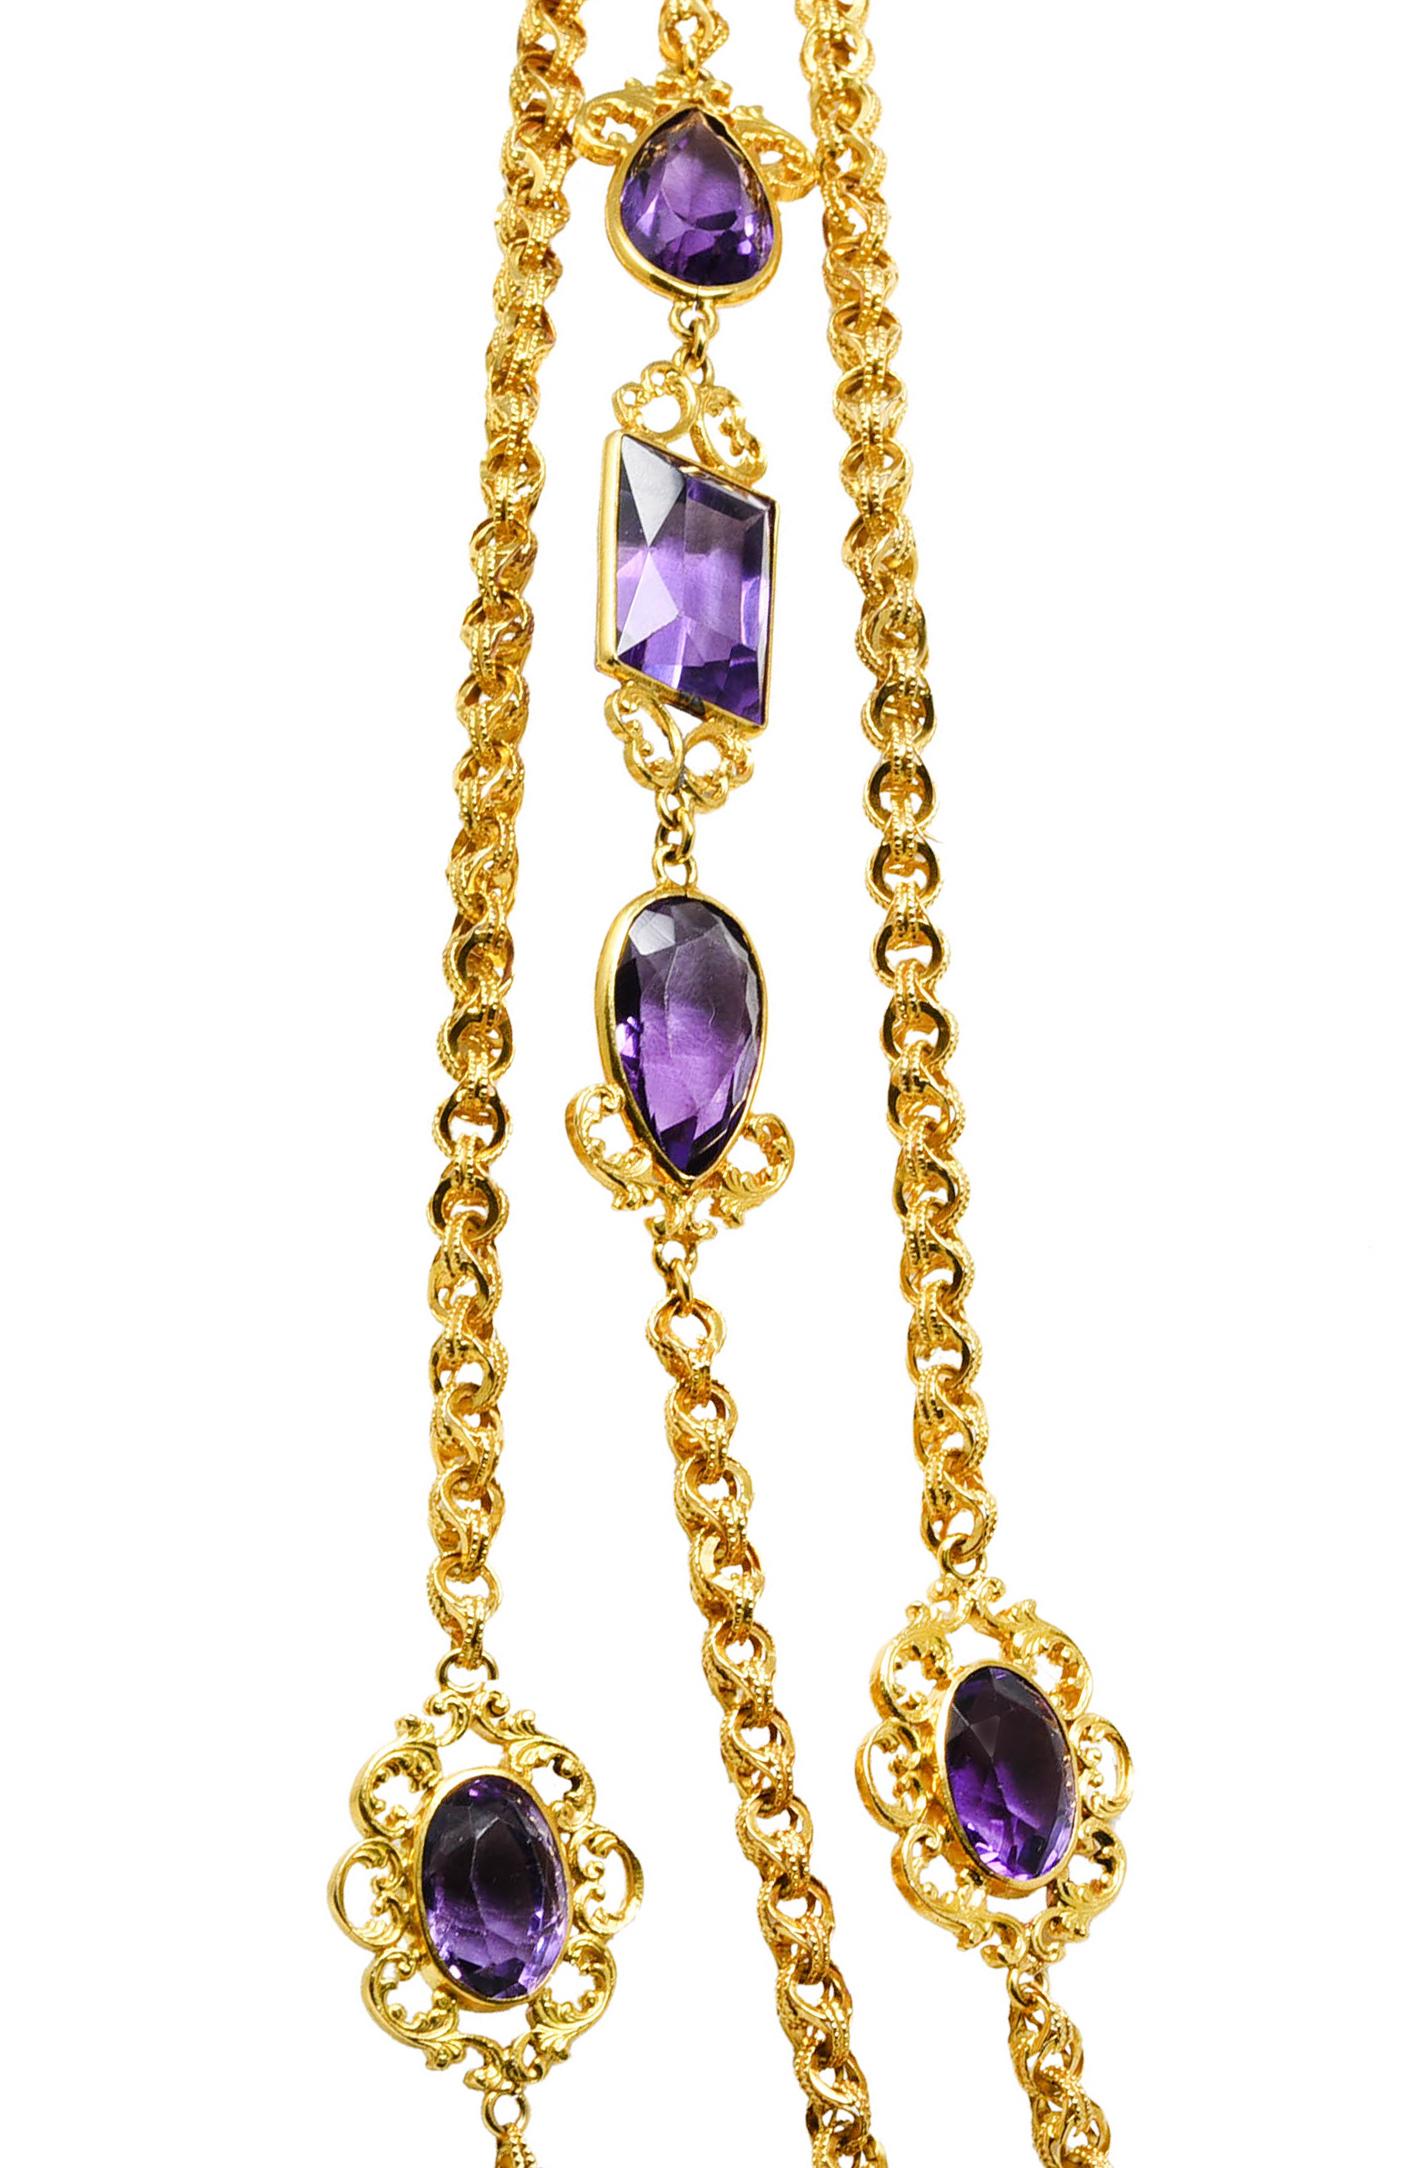 Victorian Amethyst 14 Karat Yellow Gold Long Scrolling Fob Station Chain Antique 1